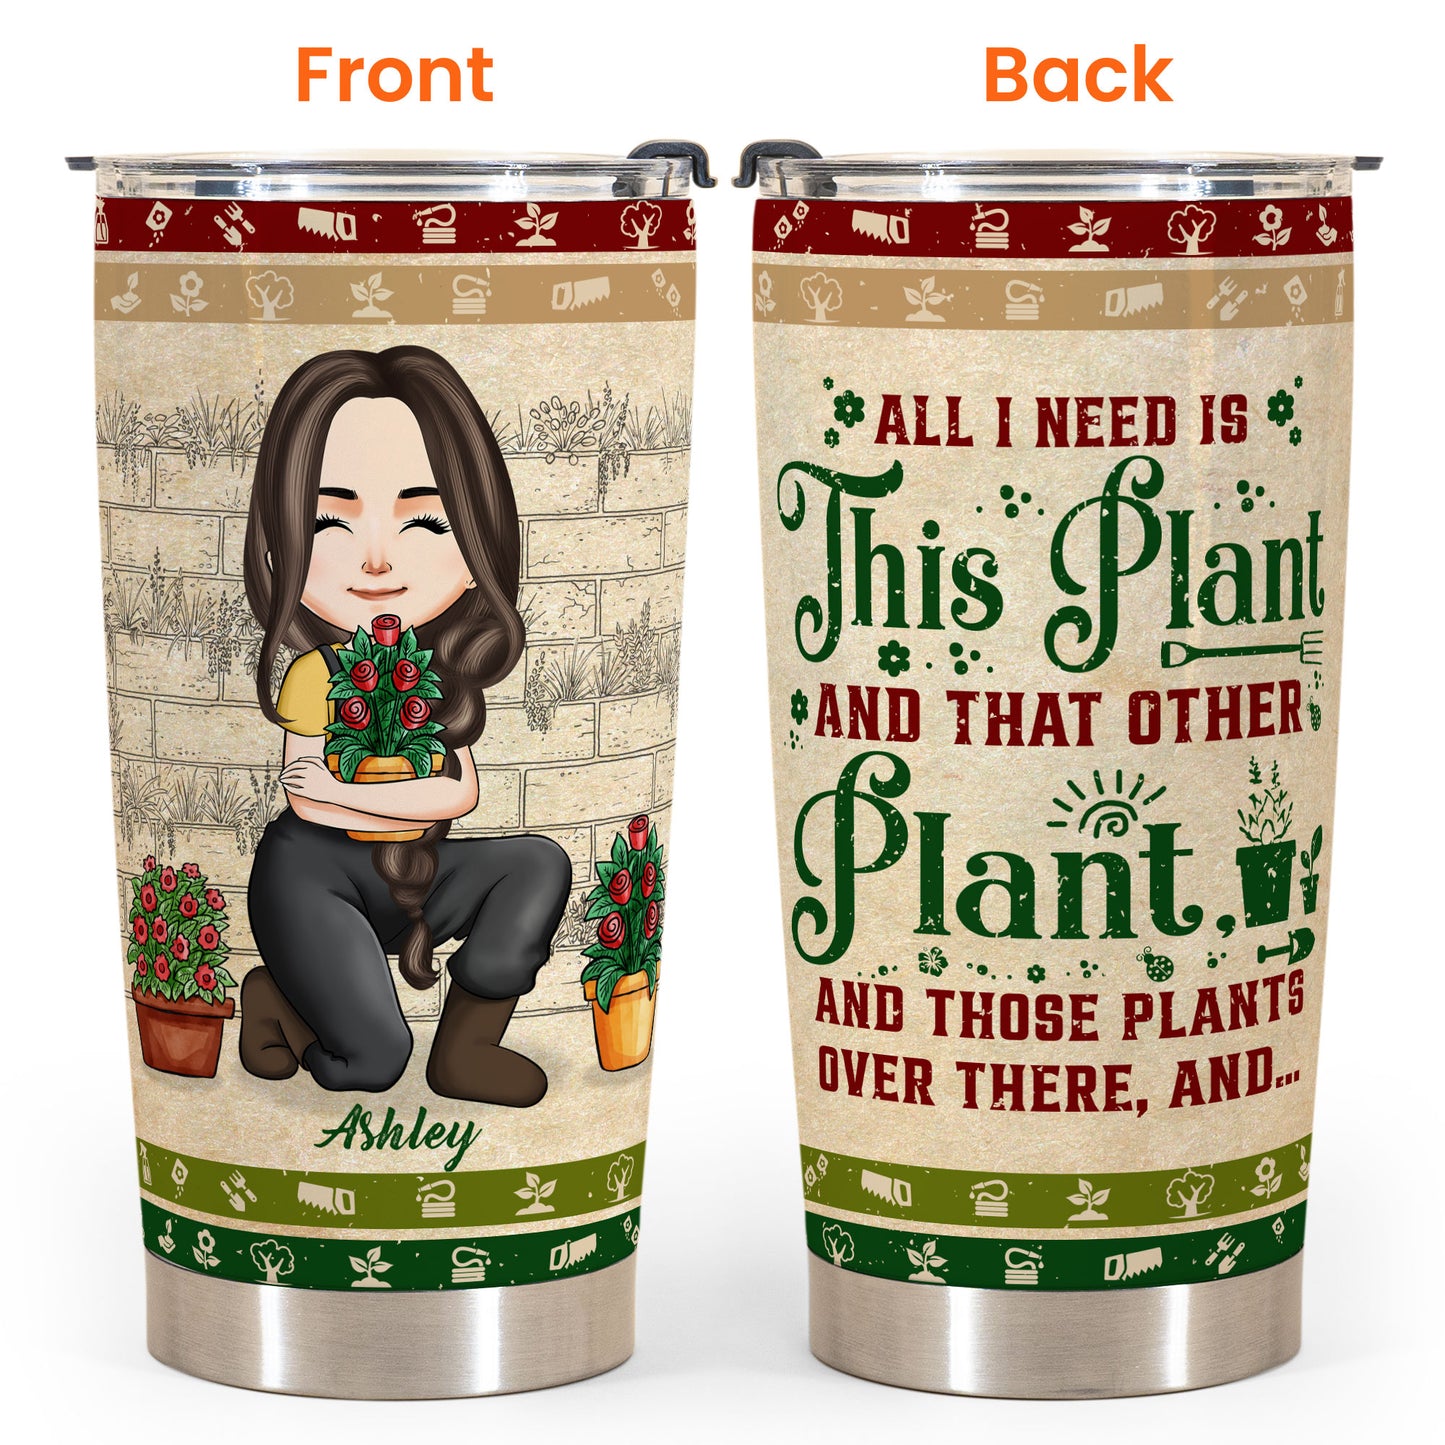 All I Need Is This Plant And That Other Plant - Personalized Tumbler Cup - Birthday, New Home, Funny Gift For Gardeners, Home Garden Lovers, Plant Ladies